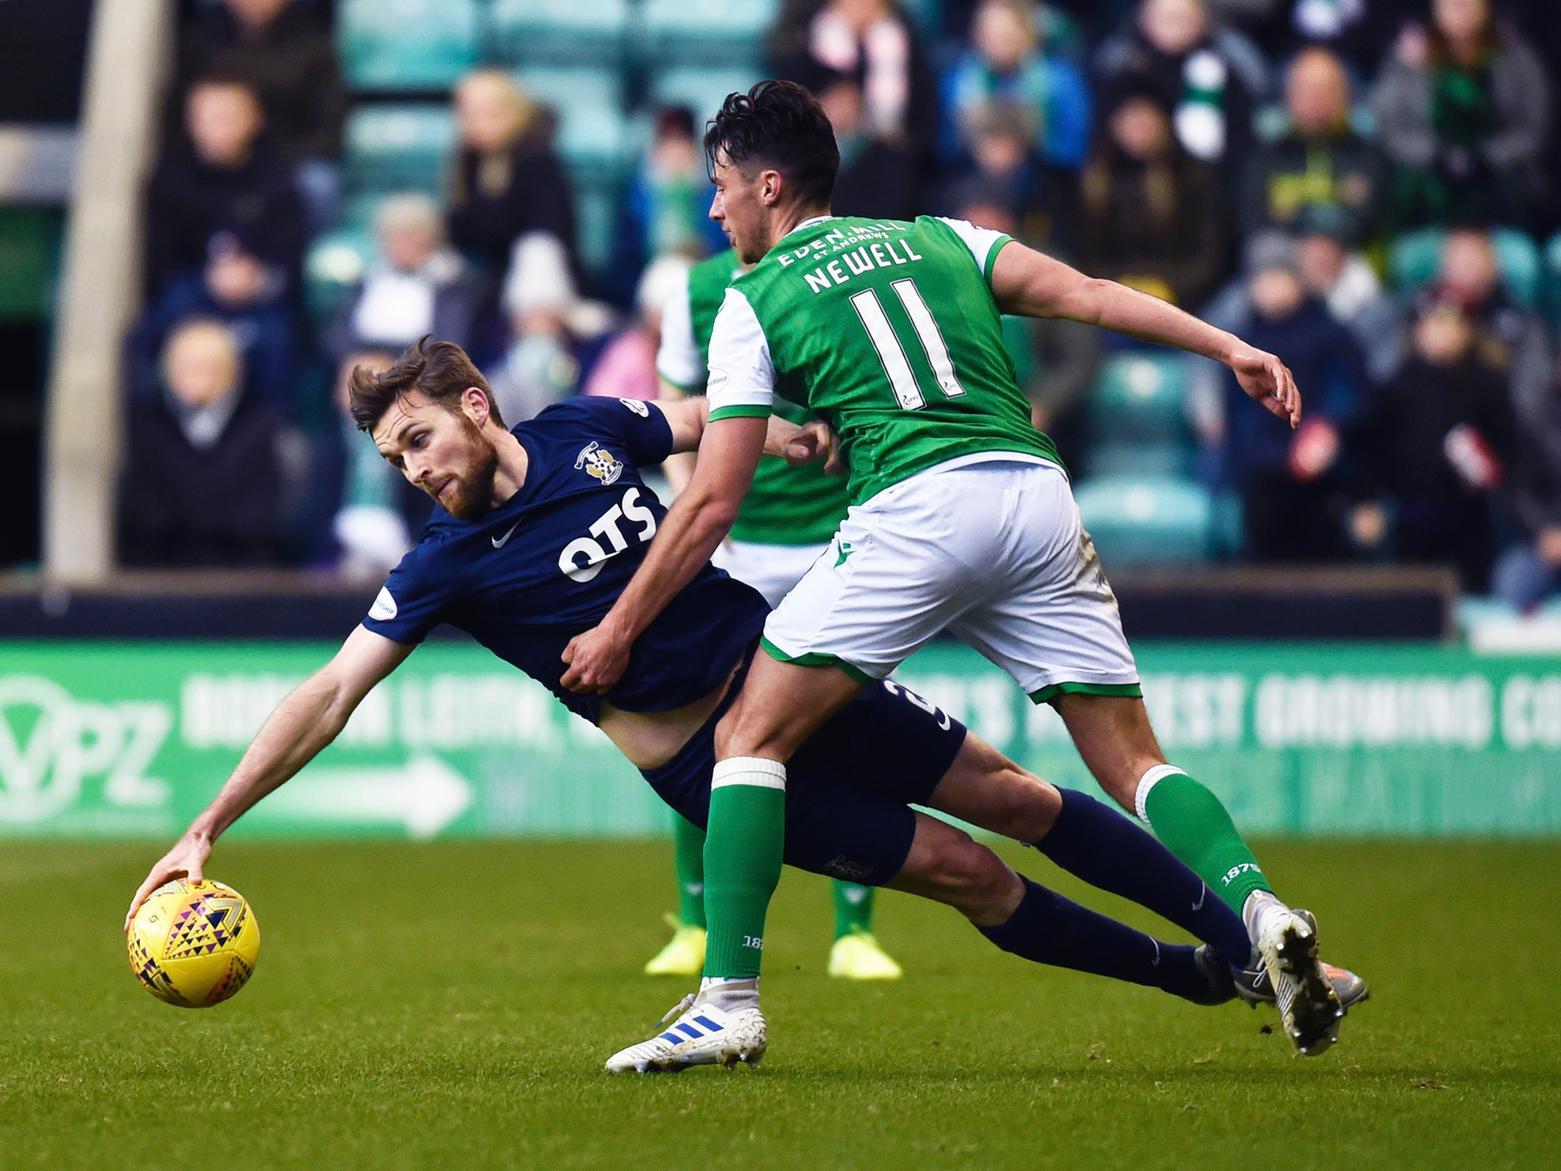 Very lively, especially in the first half where he was at the heart of a lot of Hibs attacks. However, he could do with working on his shooting as he also passed up a few half-chances.